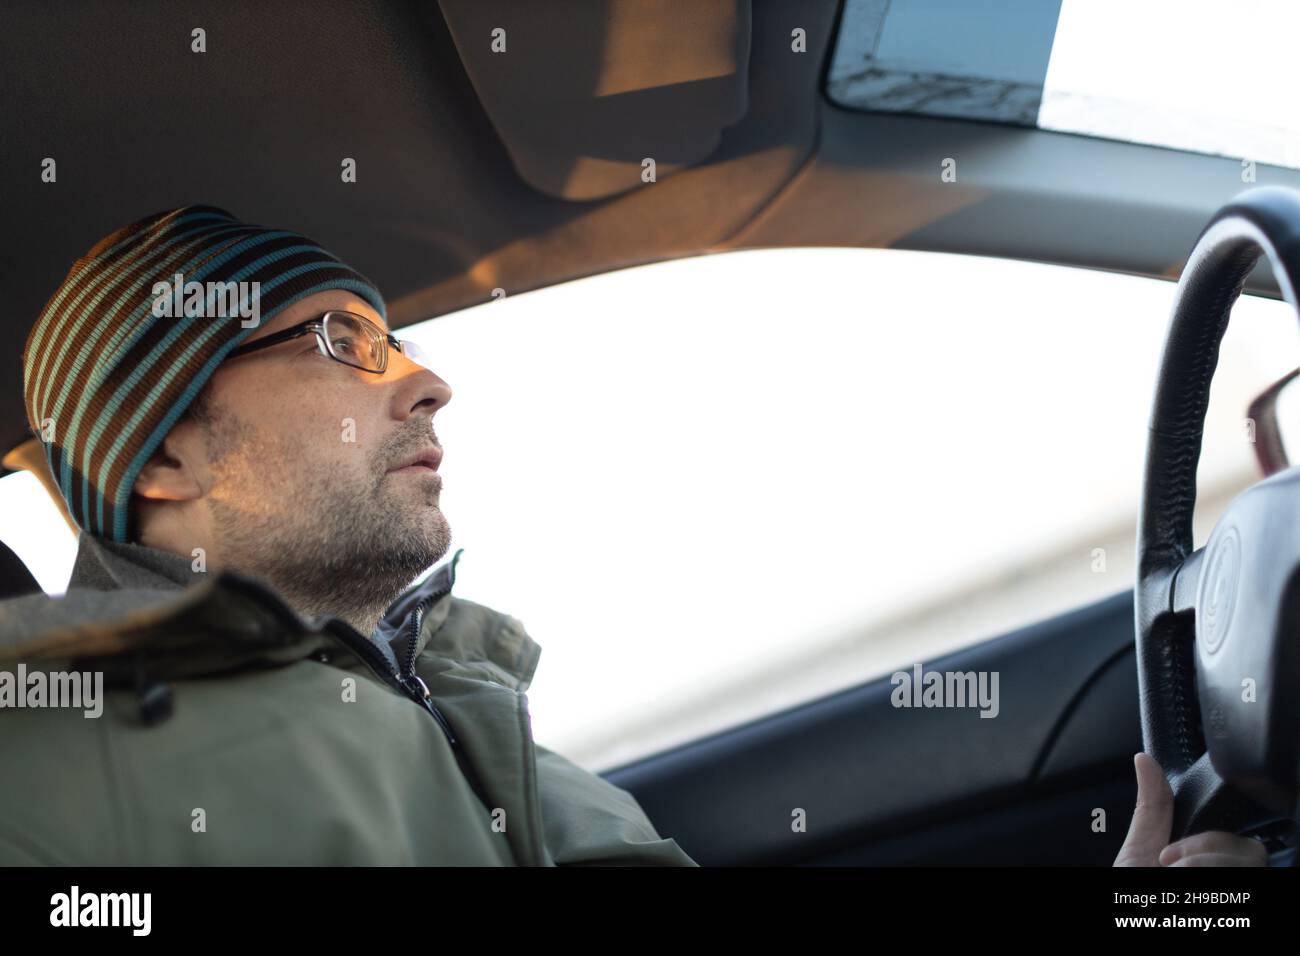 Adult man taxi driver driving car vehicle looking forward. Stock Photo